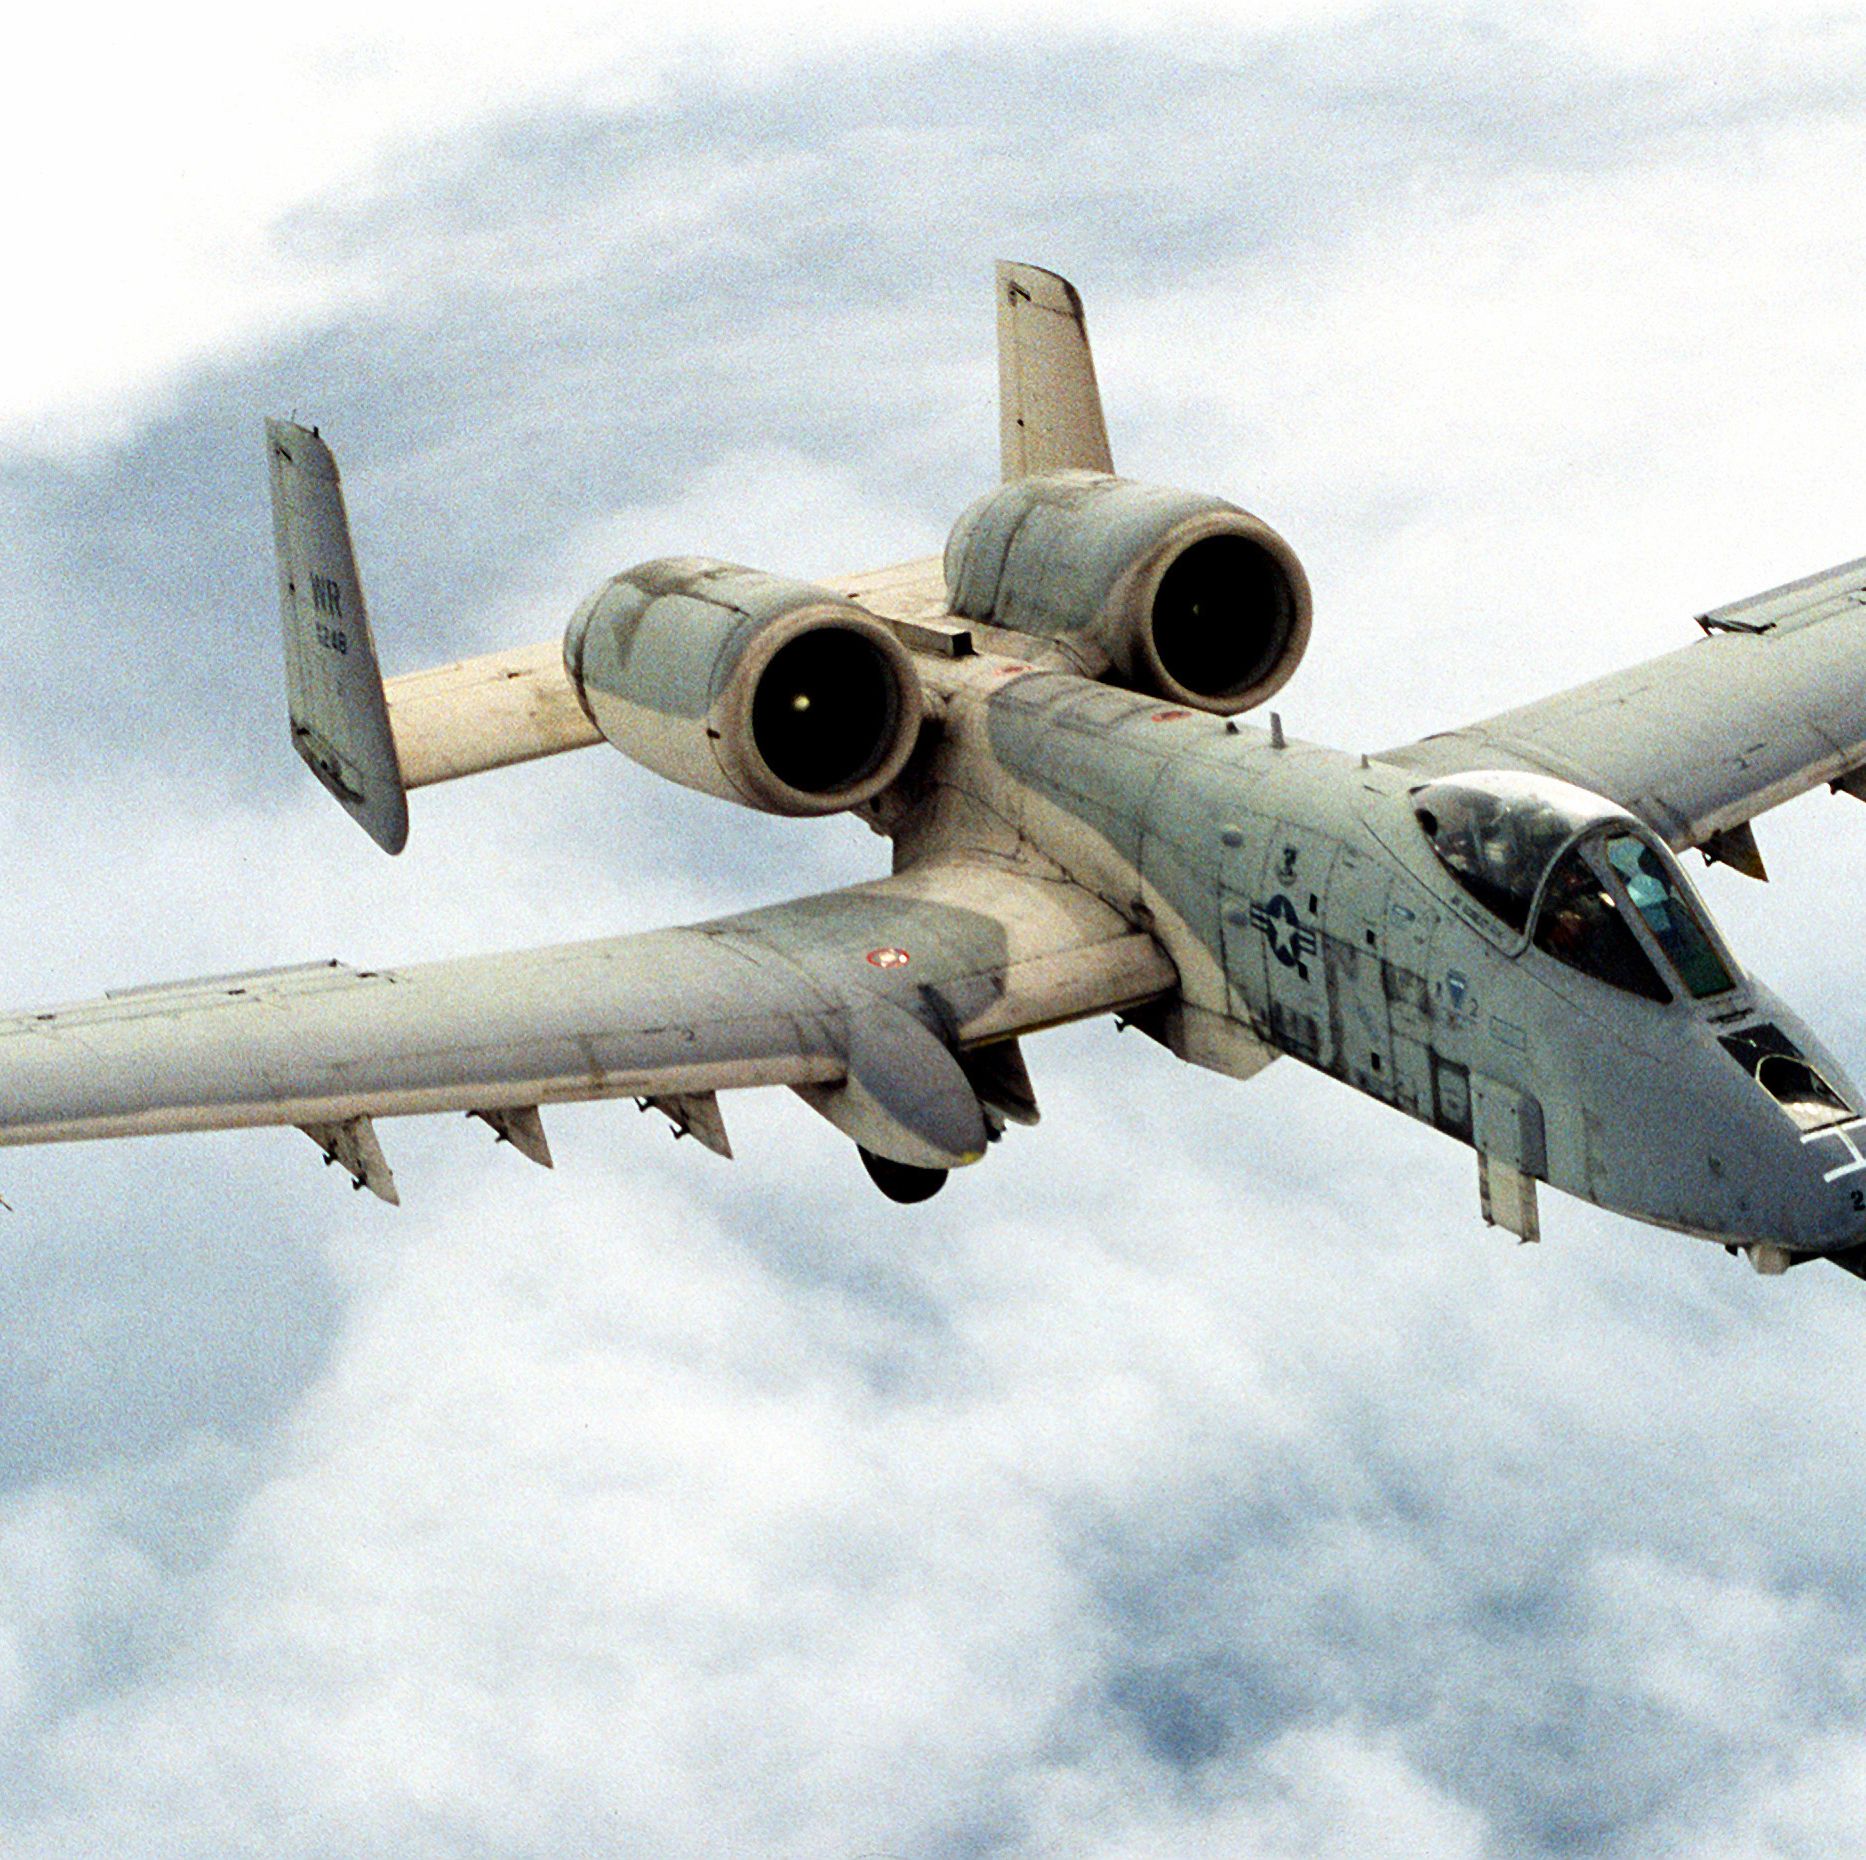 The A-10 'Warthog' Starts Its Long, Final Descent to Retirement